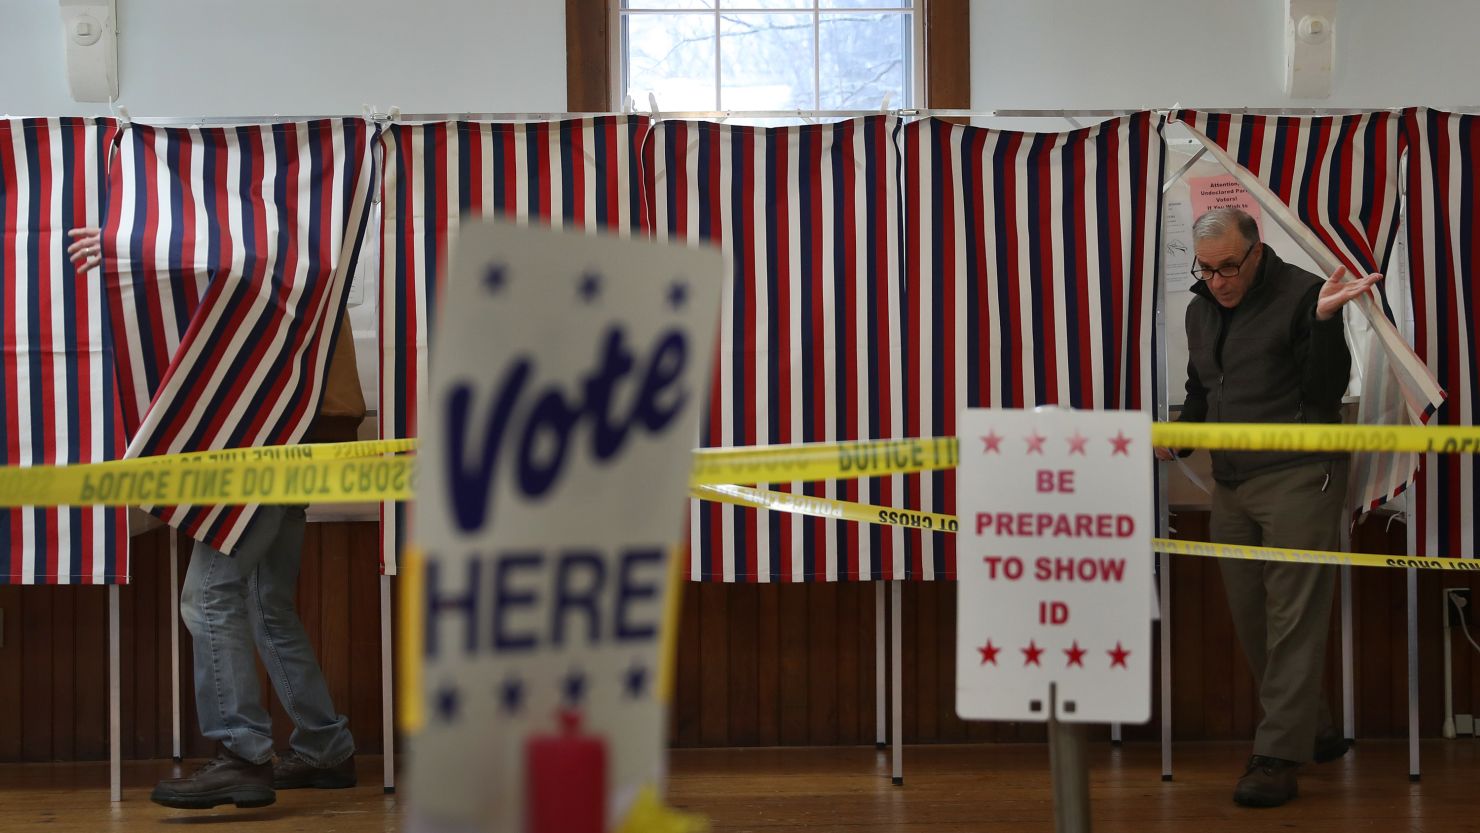 Voters emerge from polling booths setup at the Chichester Town Hall, New Hampshire, in February 2020.